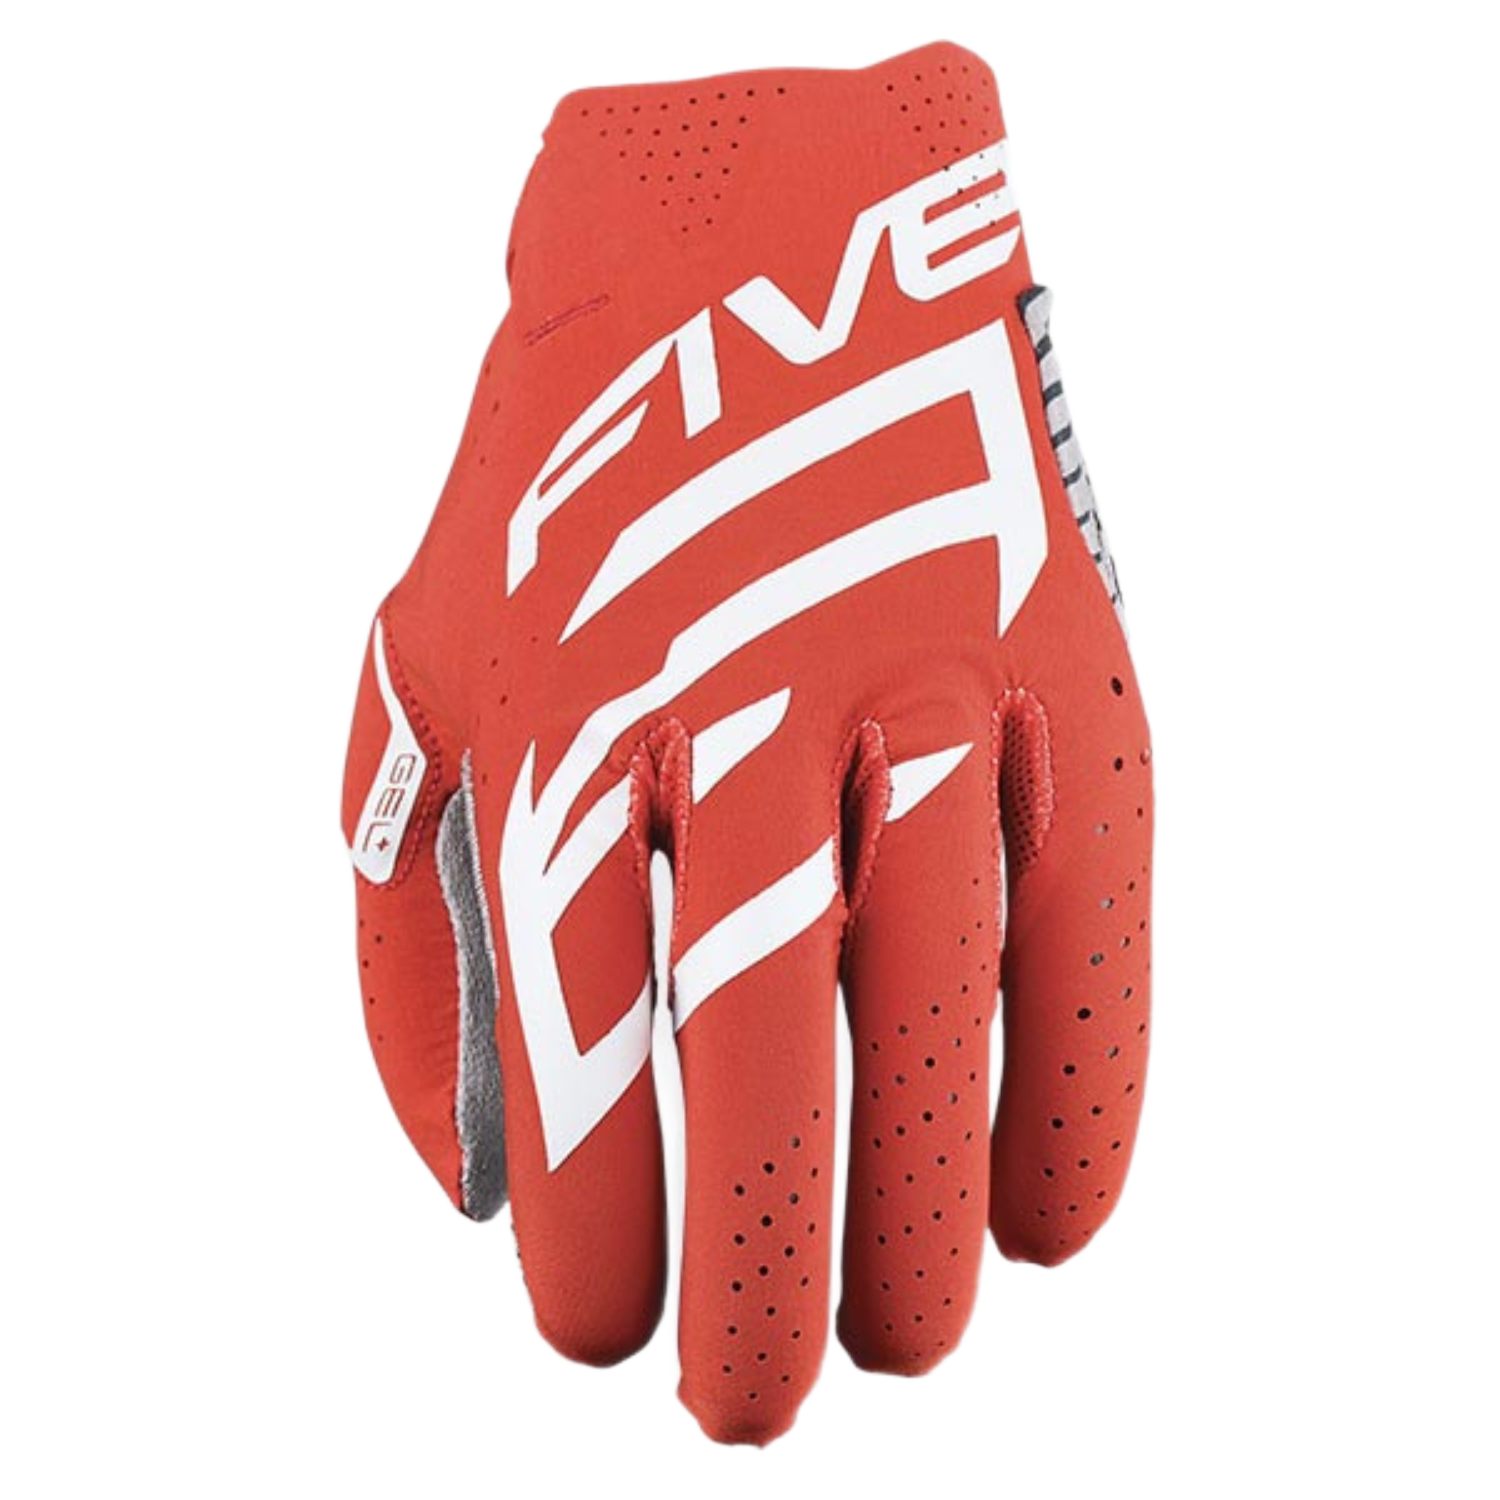 Image of Five MXF Race Gloves Red Size 2XL ID 3841300111860